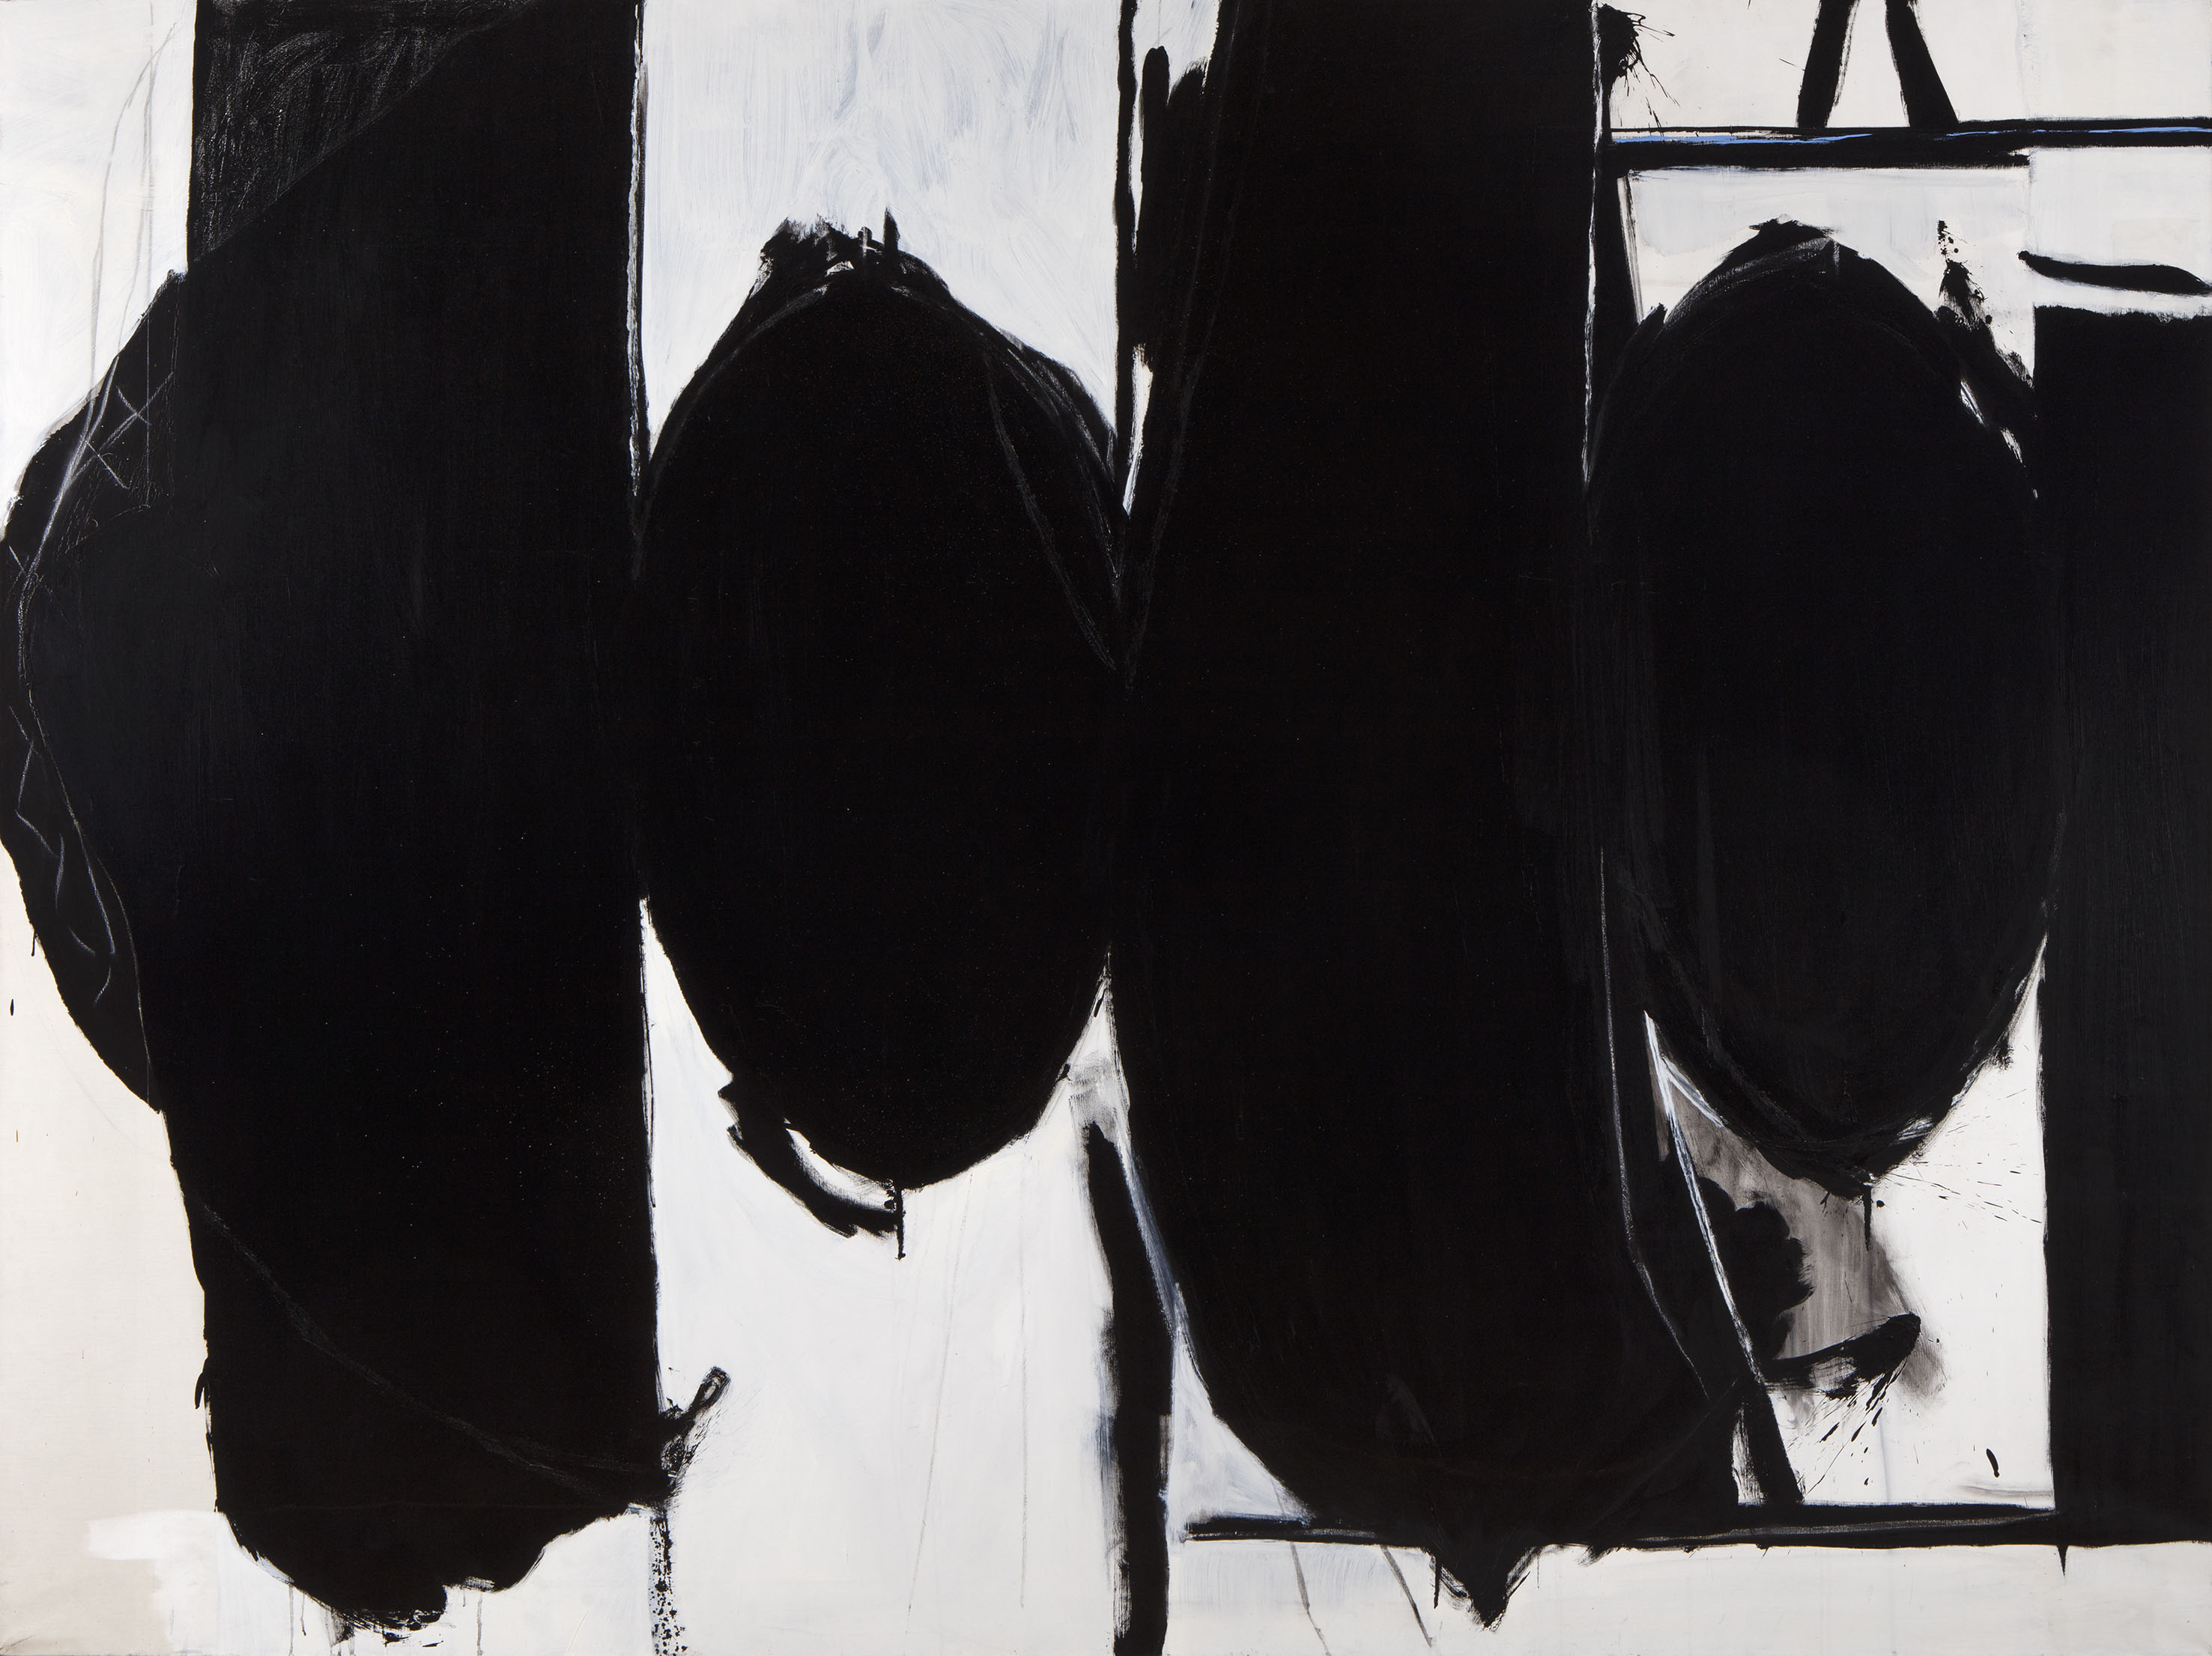 Robert Motherwell, Elegy to the Spanish Republic, um 1962/1982 Magna und Acryl auf Leinwand  182.9 x 244.5 cm Modern Art Museum of Fort Worth. Museumsankauf, Friends of Art Endowment Fund © Copyright 2023 Dedalus Foundation, Inc. / Licensed by Artists Rights Society (ARS), NY.